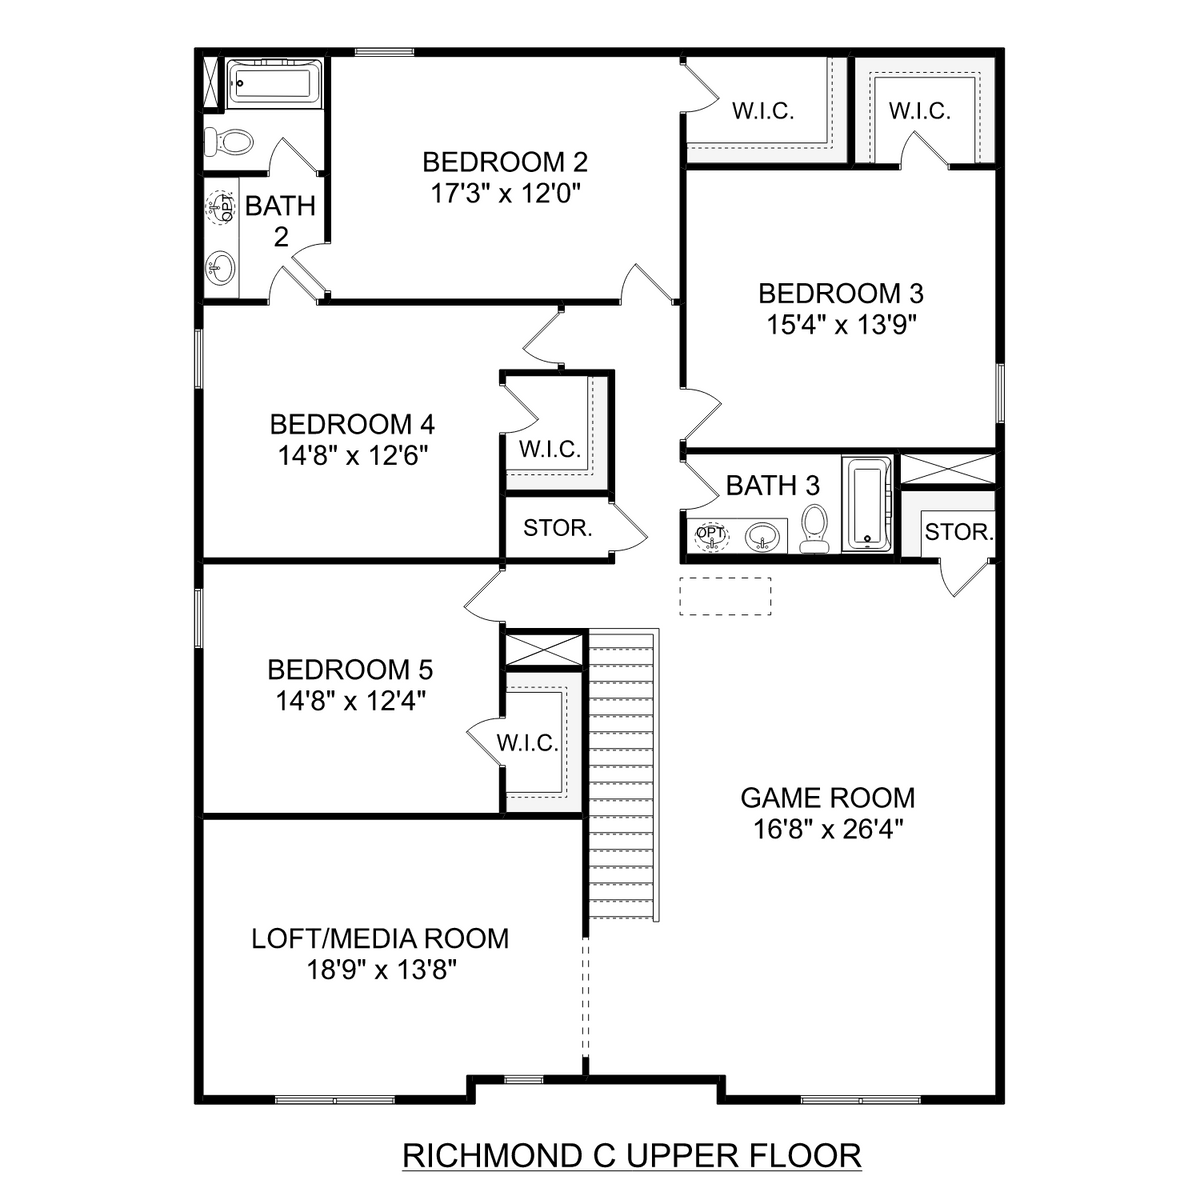 2 - The Richmond C floor plan layout for 207 Goldie Court in Davidson Homes' Heritage Lakes community.